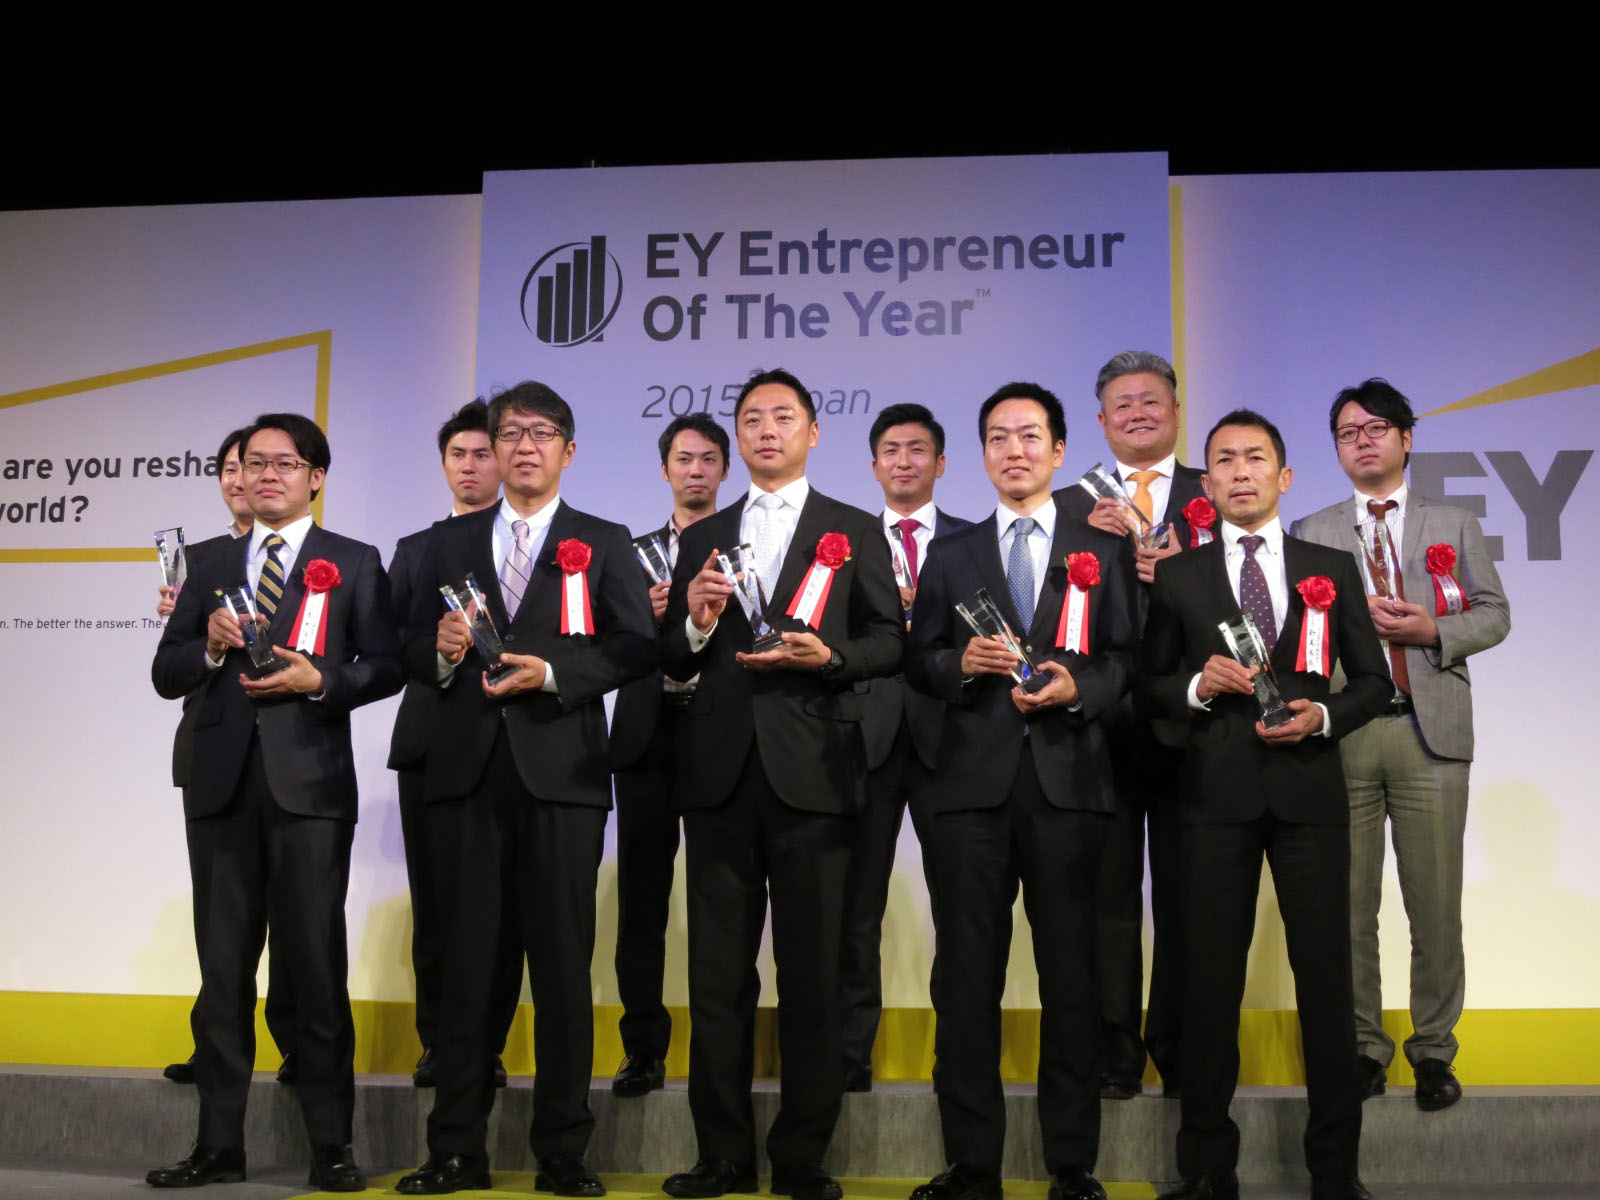 Candidates for the Challenging Spirit award at the EY Entrepreneur Of the Year event take the stage at the Imperial Hotel in Tokyo on Nov. 24. | KAZUAKI NAGATA